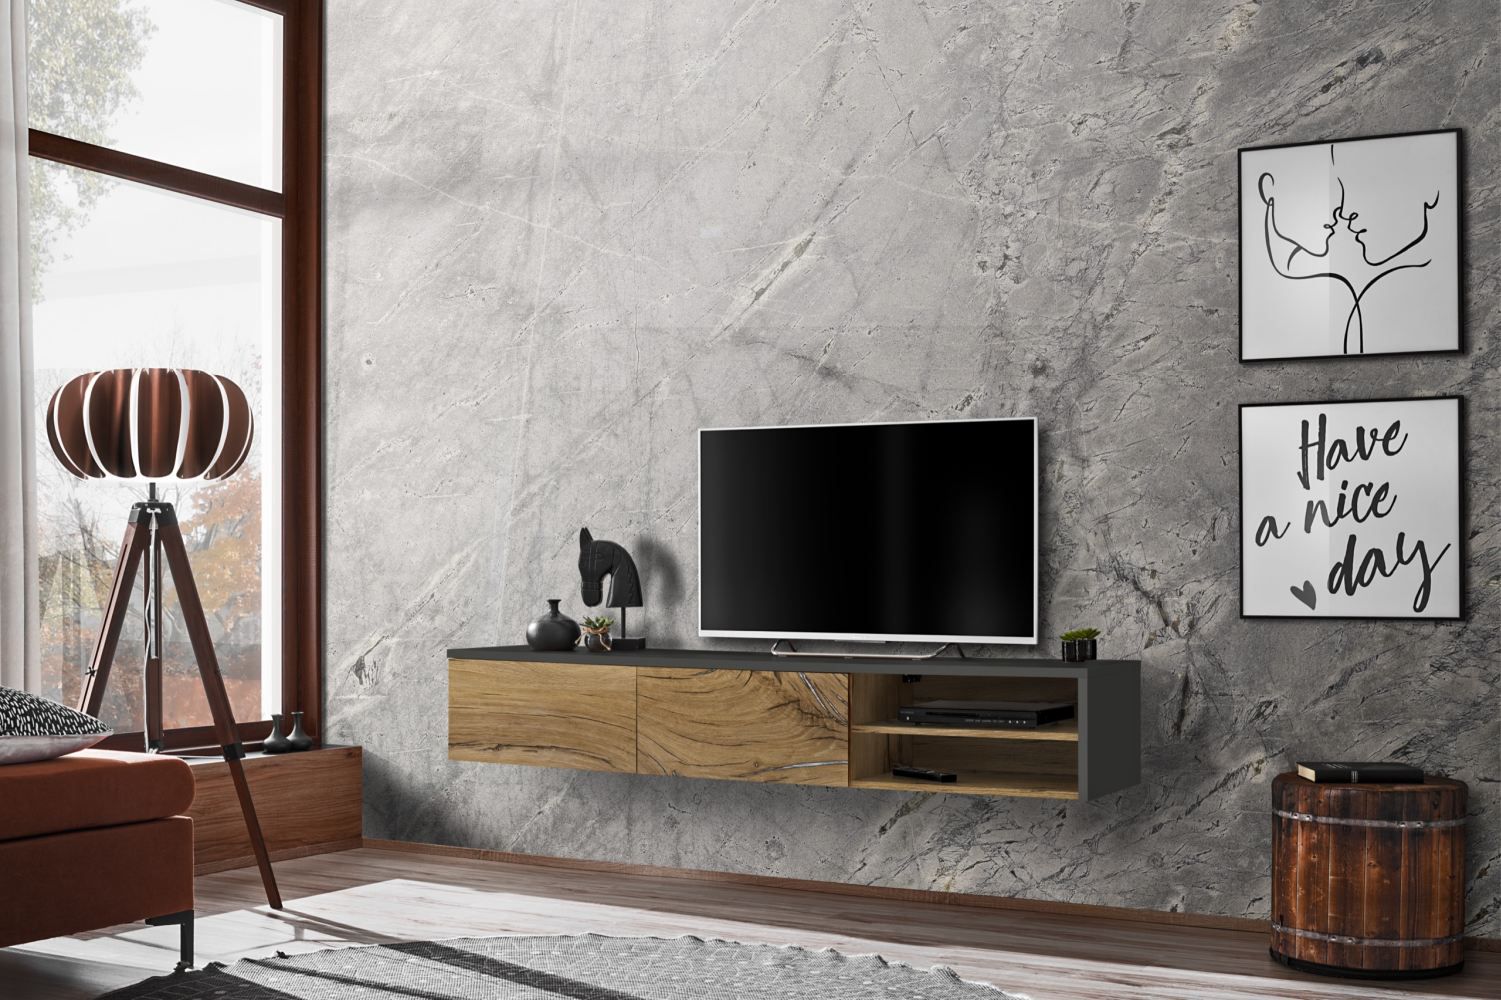 TV cabinet with three compartments Bjordal 16, color: oak Flagstaff / anthracite - Dimensions: 30 x 180 x 40 cm (H x W x D), with push-to-open function